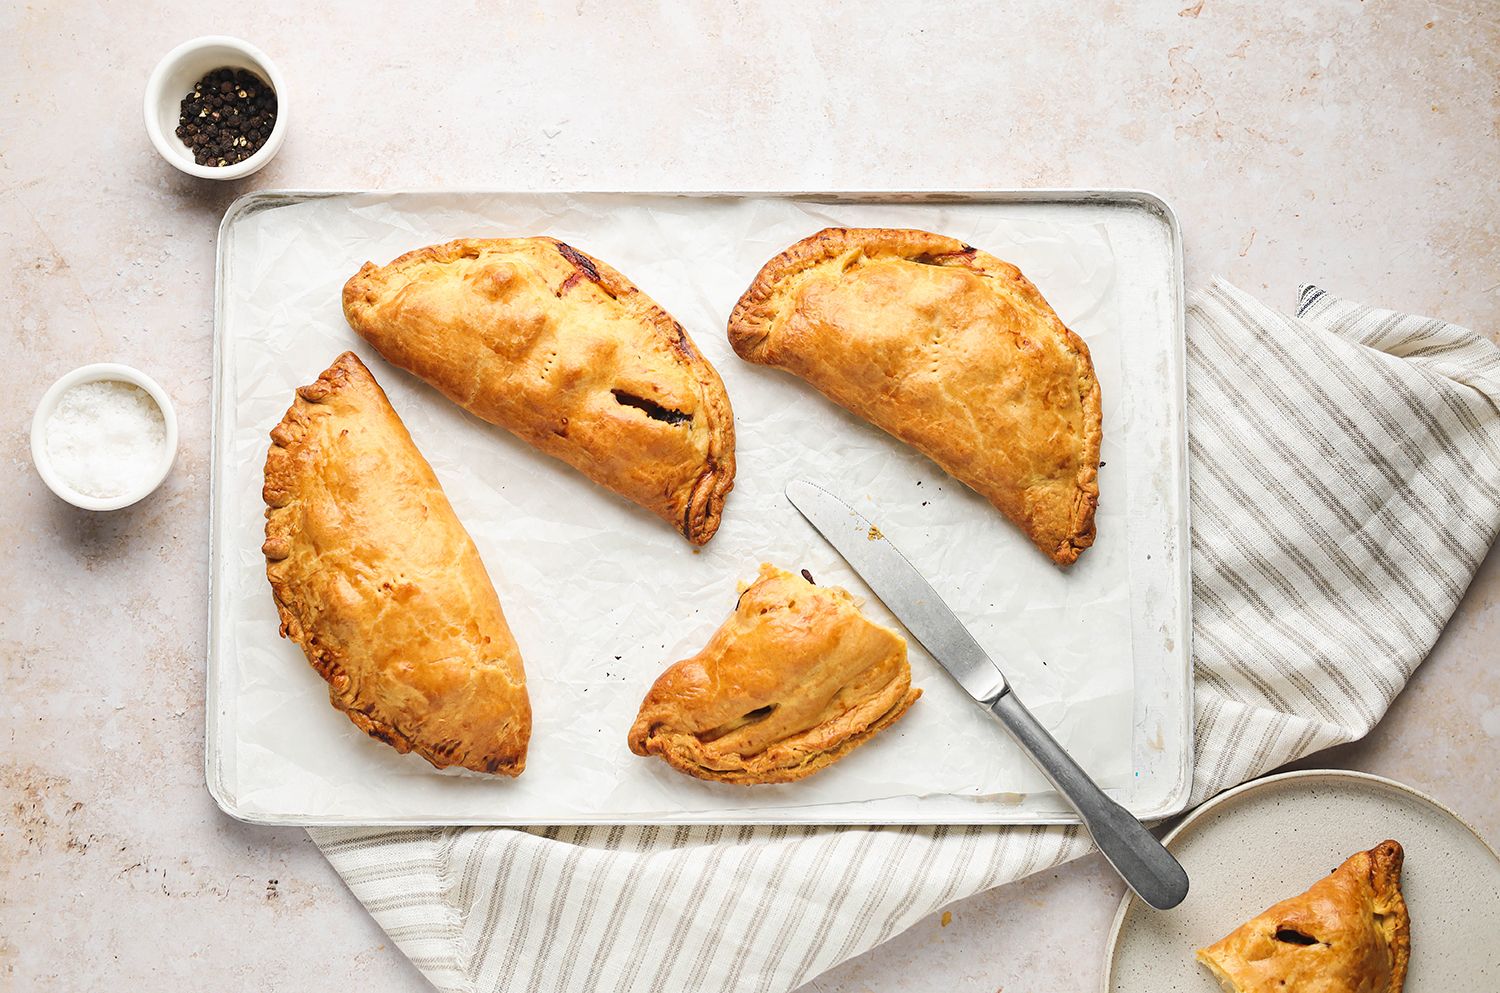 Cornish Pasty Recipe With Mince Meat And Potatoes | Deporecipe.co